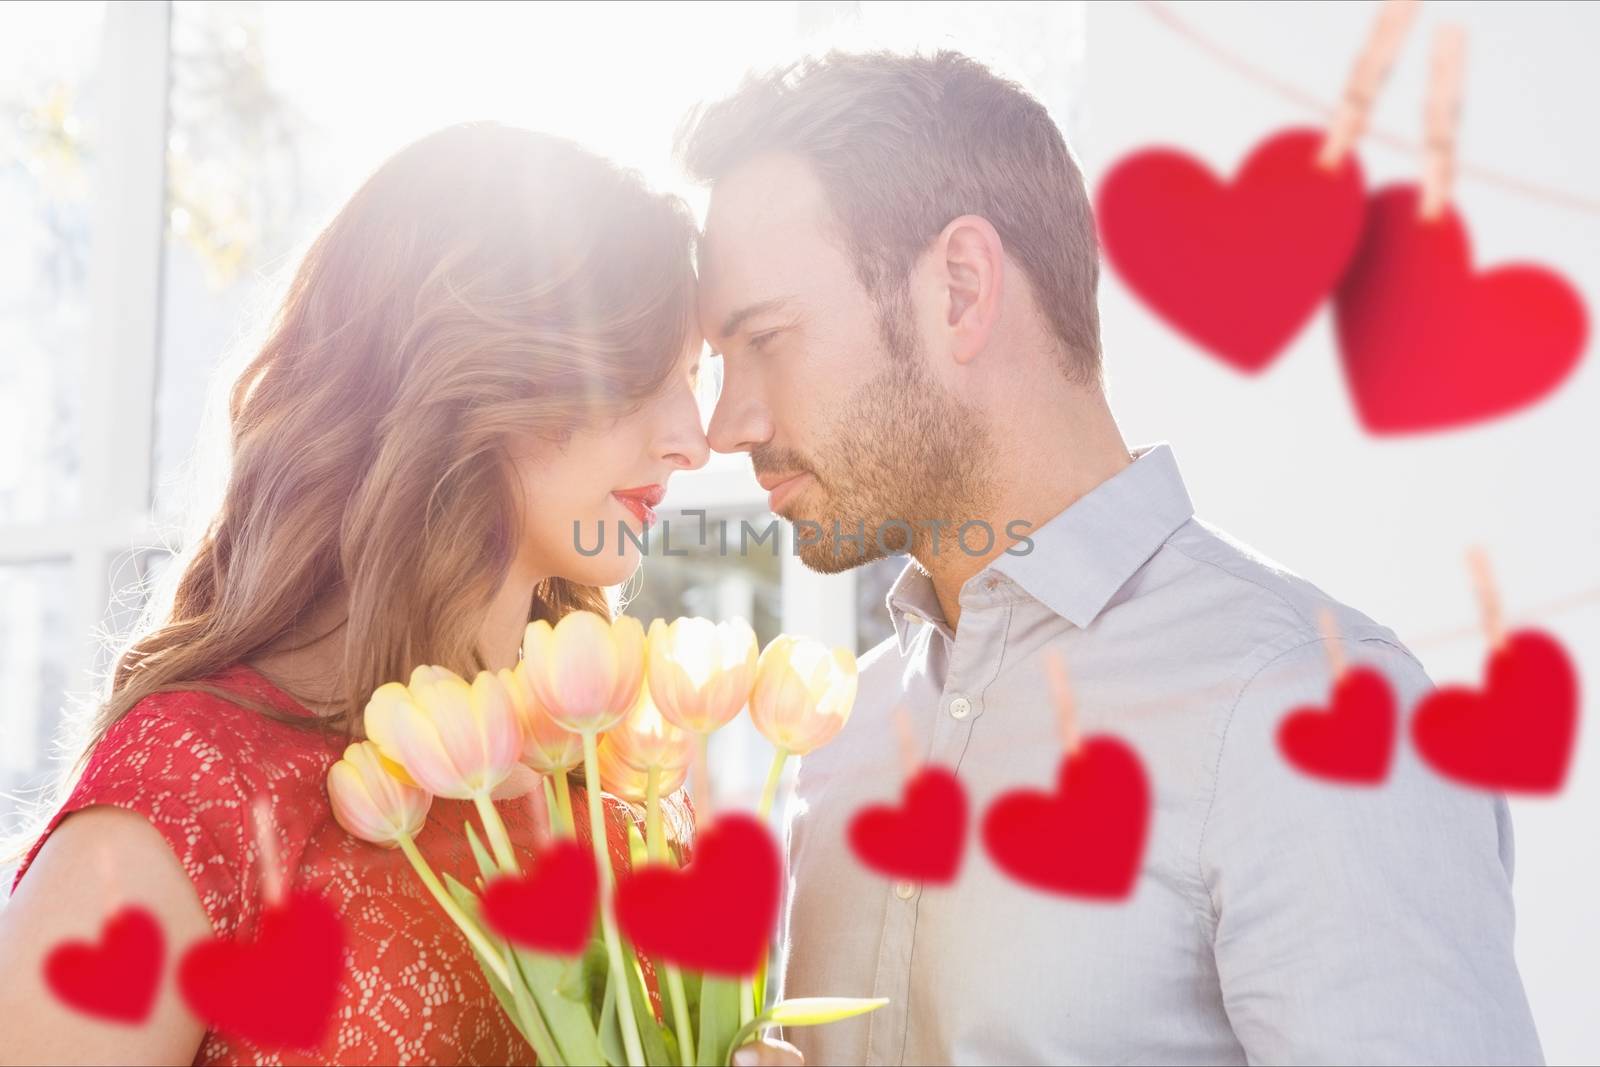 Romantic couple embracing each other with red hanging hearts